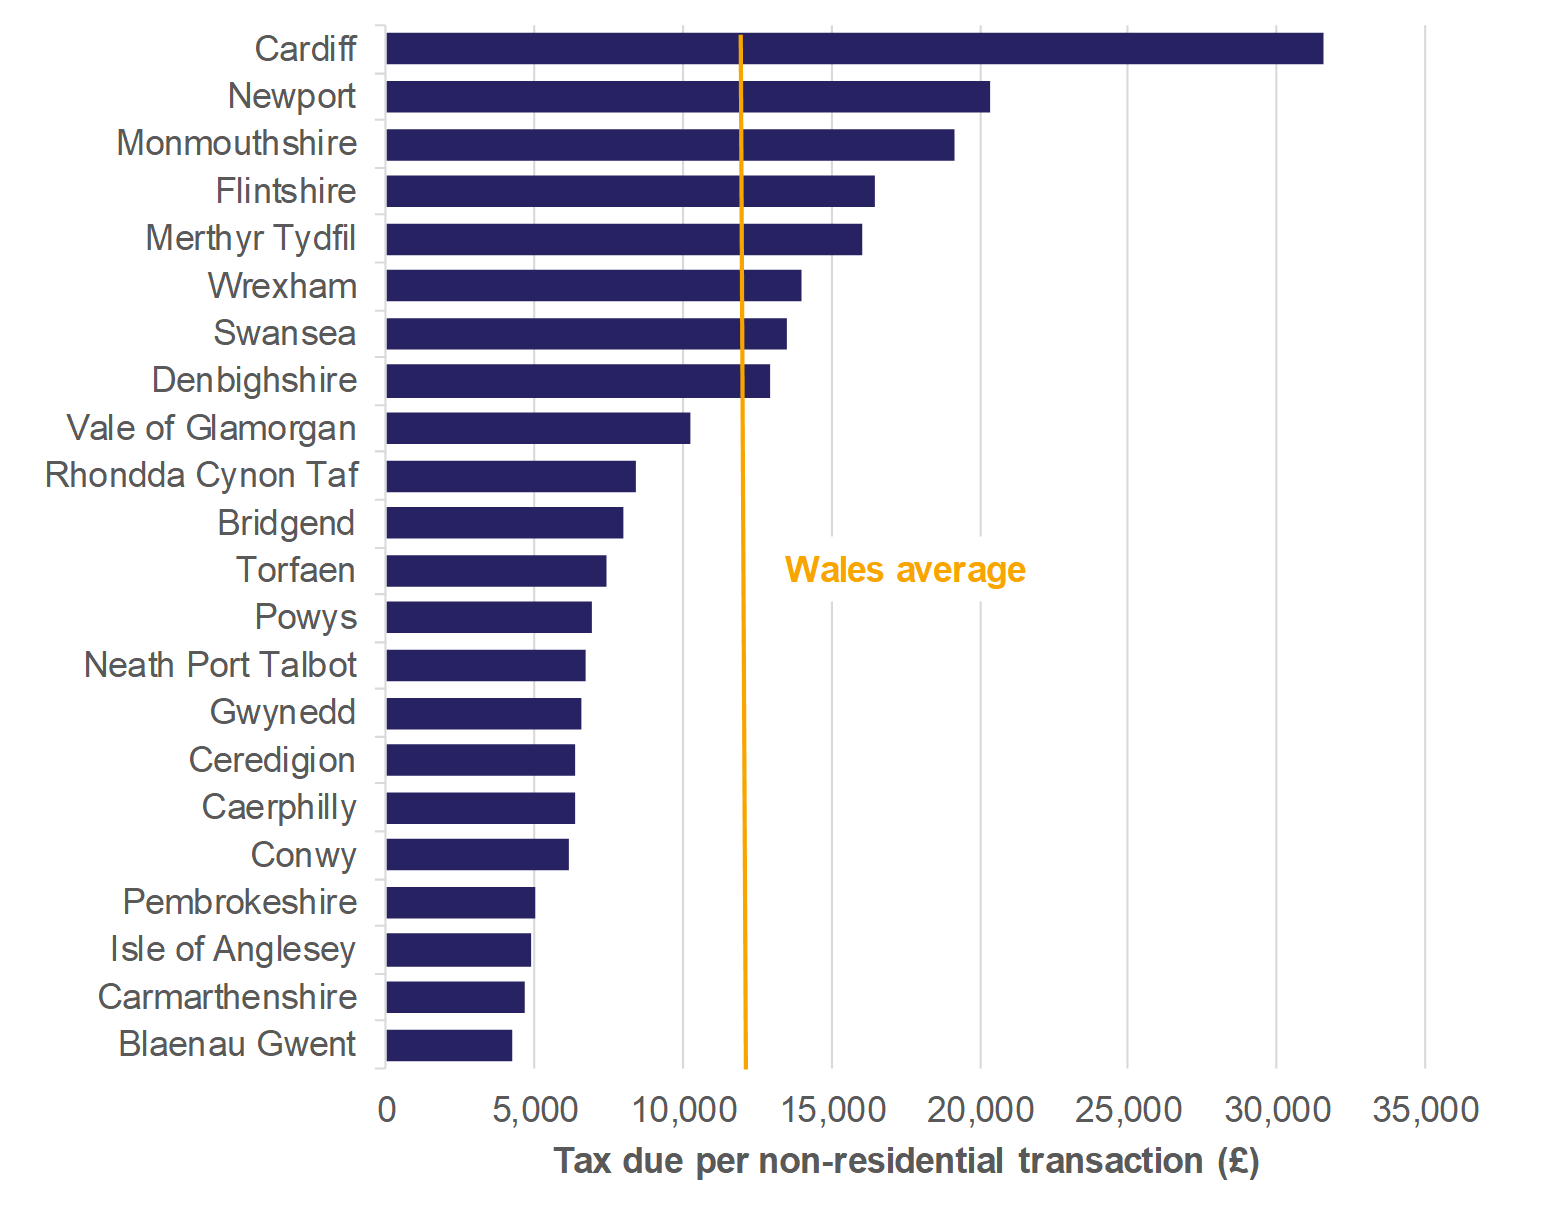 Figure 8.2 shows for non-residential transactions: the amount of tax due per transaction for all local authorities and a Wales average.